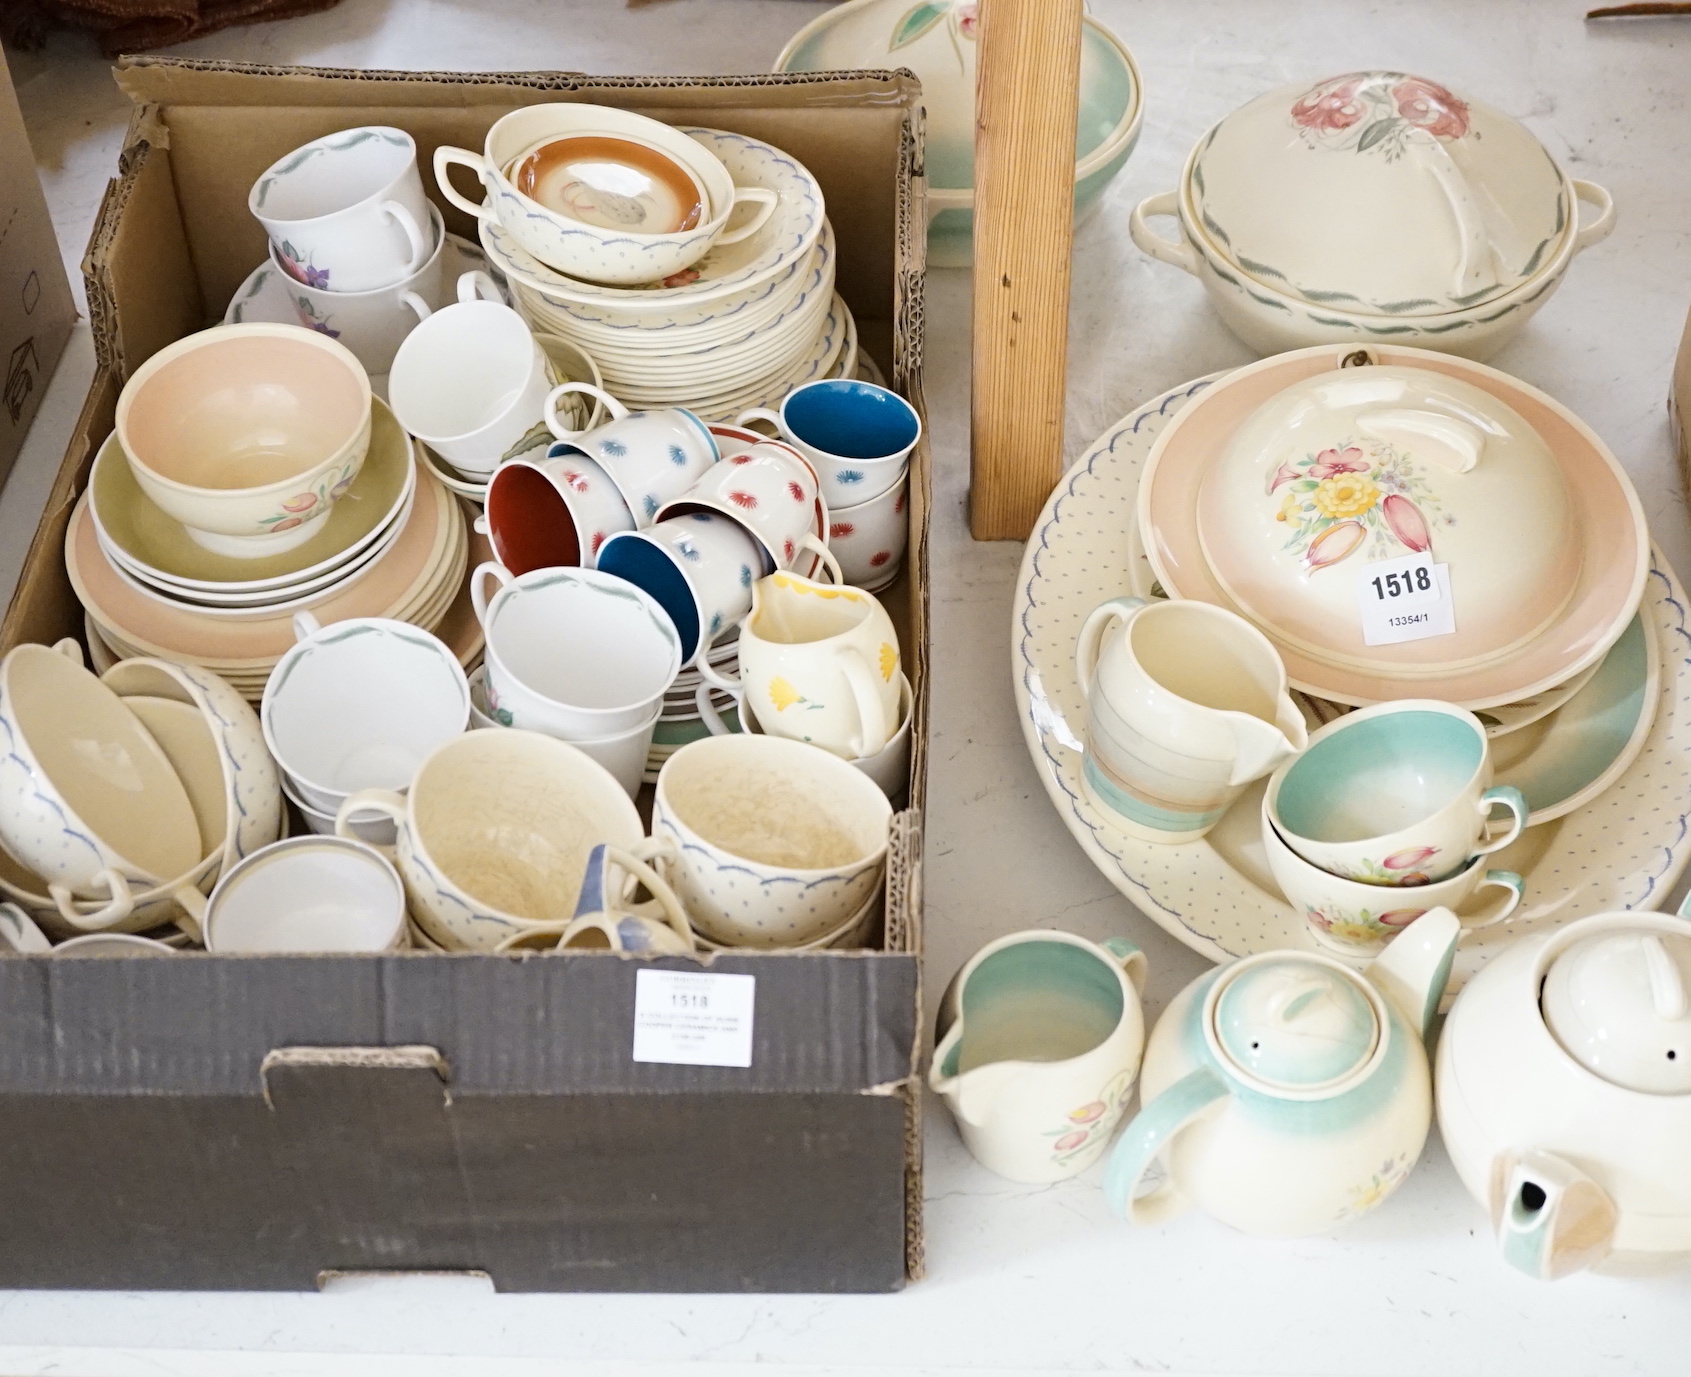 A collection of Susie Cooper ceramics and tablewares including tureens, an oval platter, cups and saucers